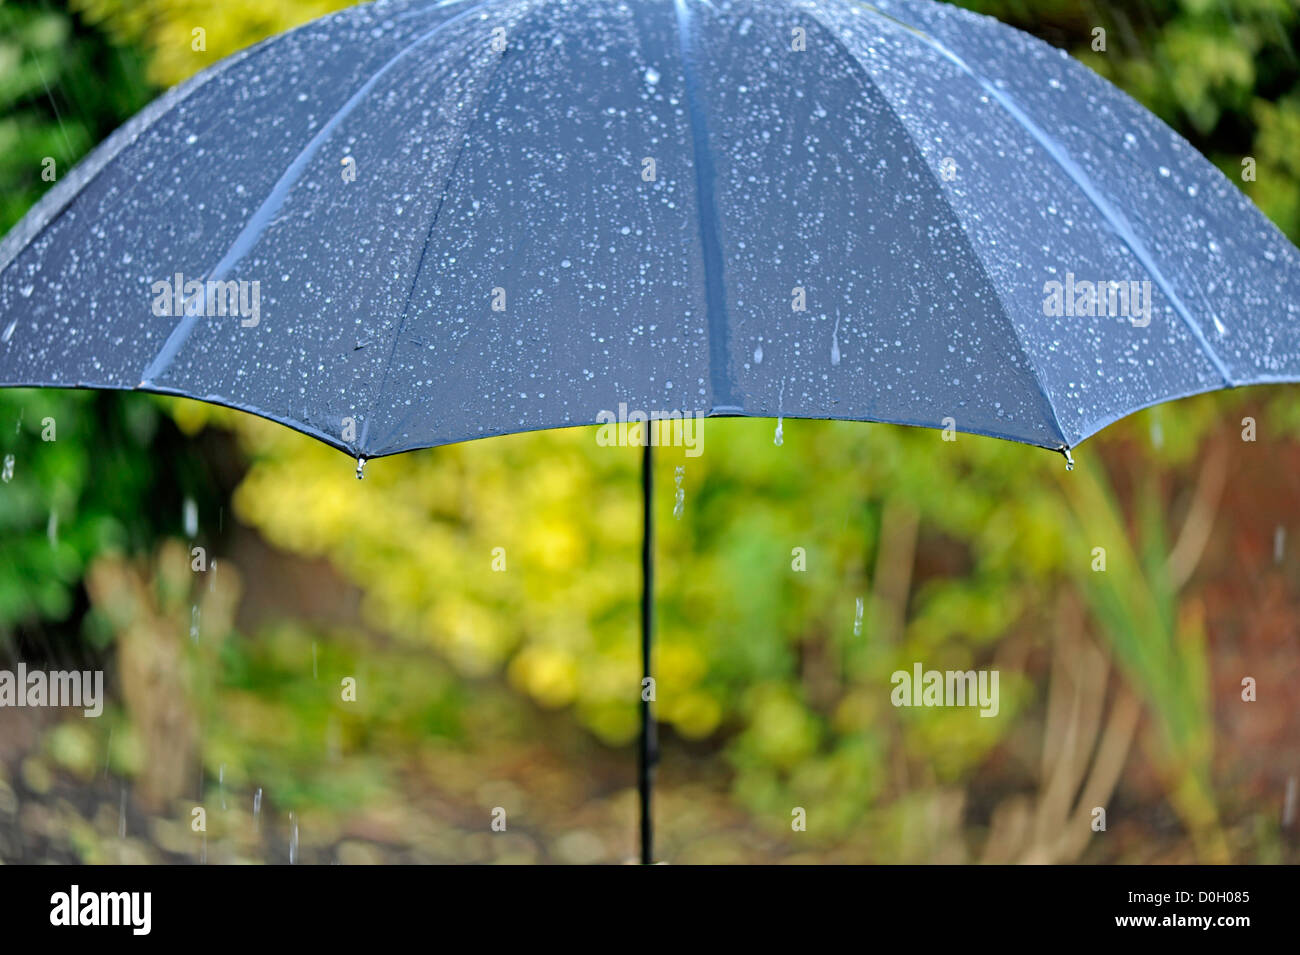 Close-up of an umbrella in the rain Stock Photo